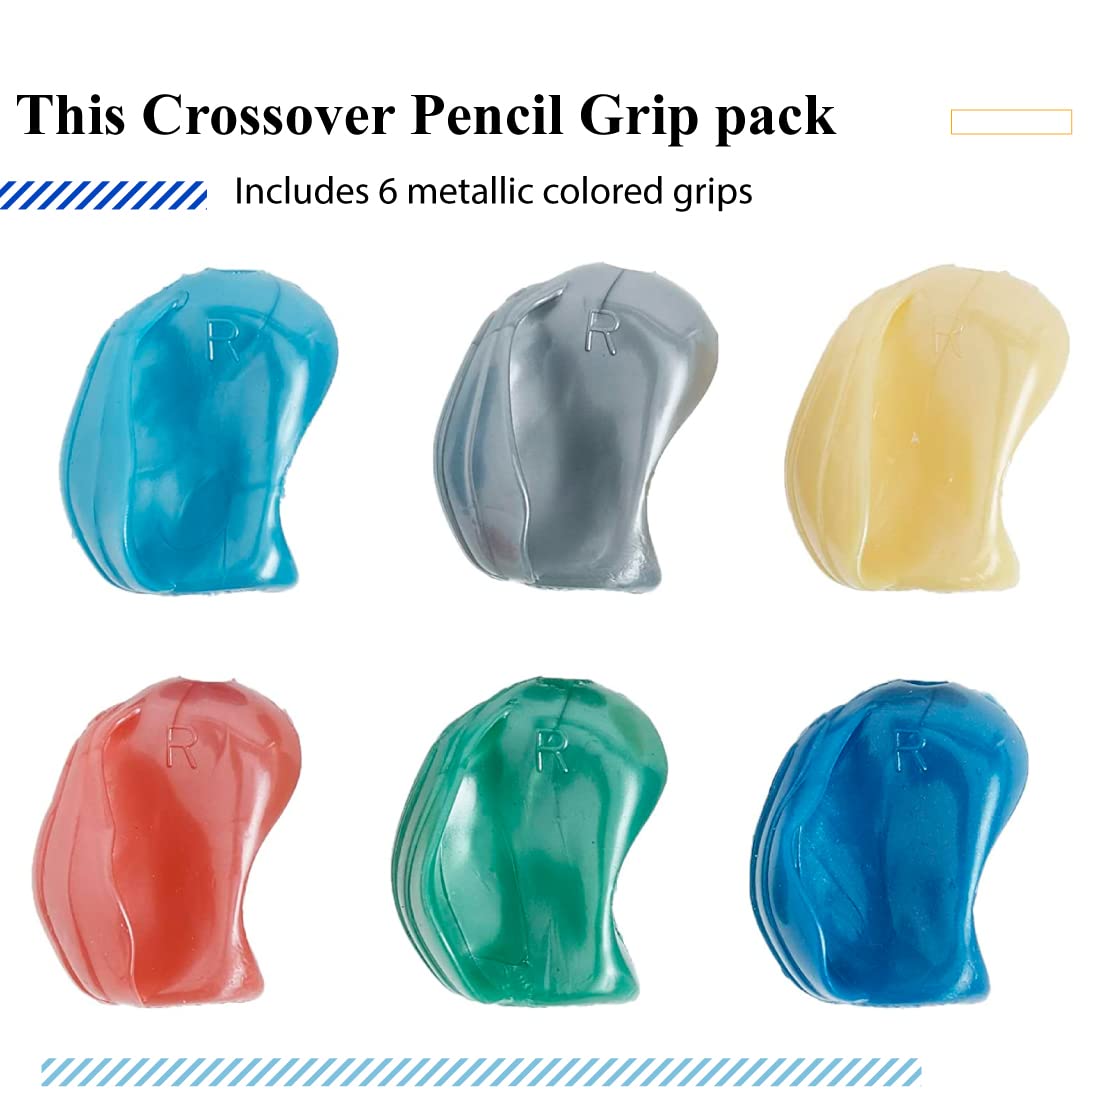 The Pencil Grip Pencil Grips, The Crossover Grip, Metallic Ergonomic Writing Aid For Righties And Lefties, Colorful Pencil Grippers, Assorted Metallic Colors, 6 Count - TPG-17706